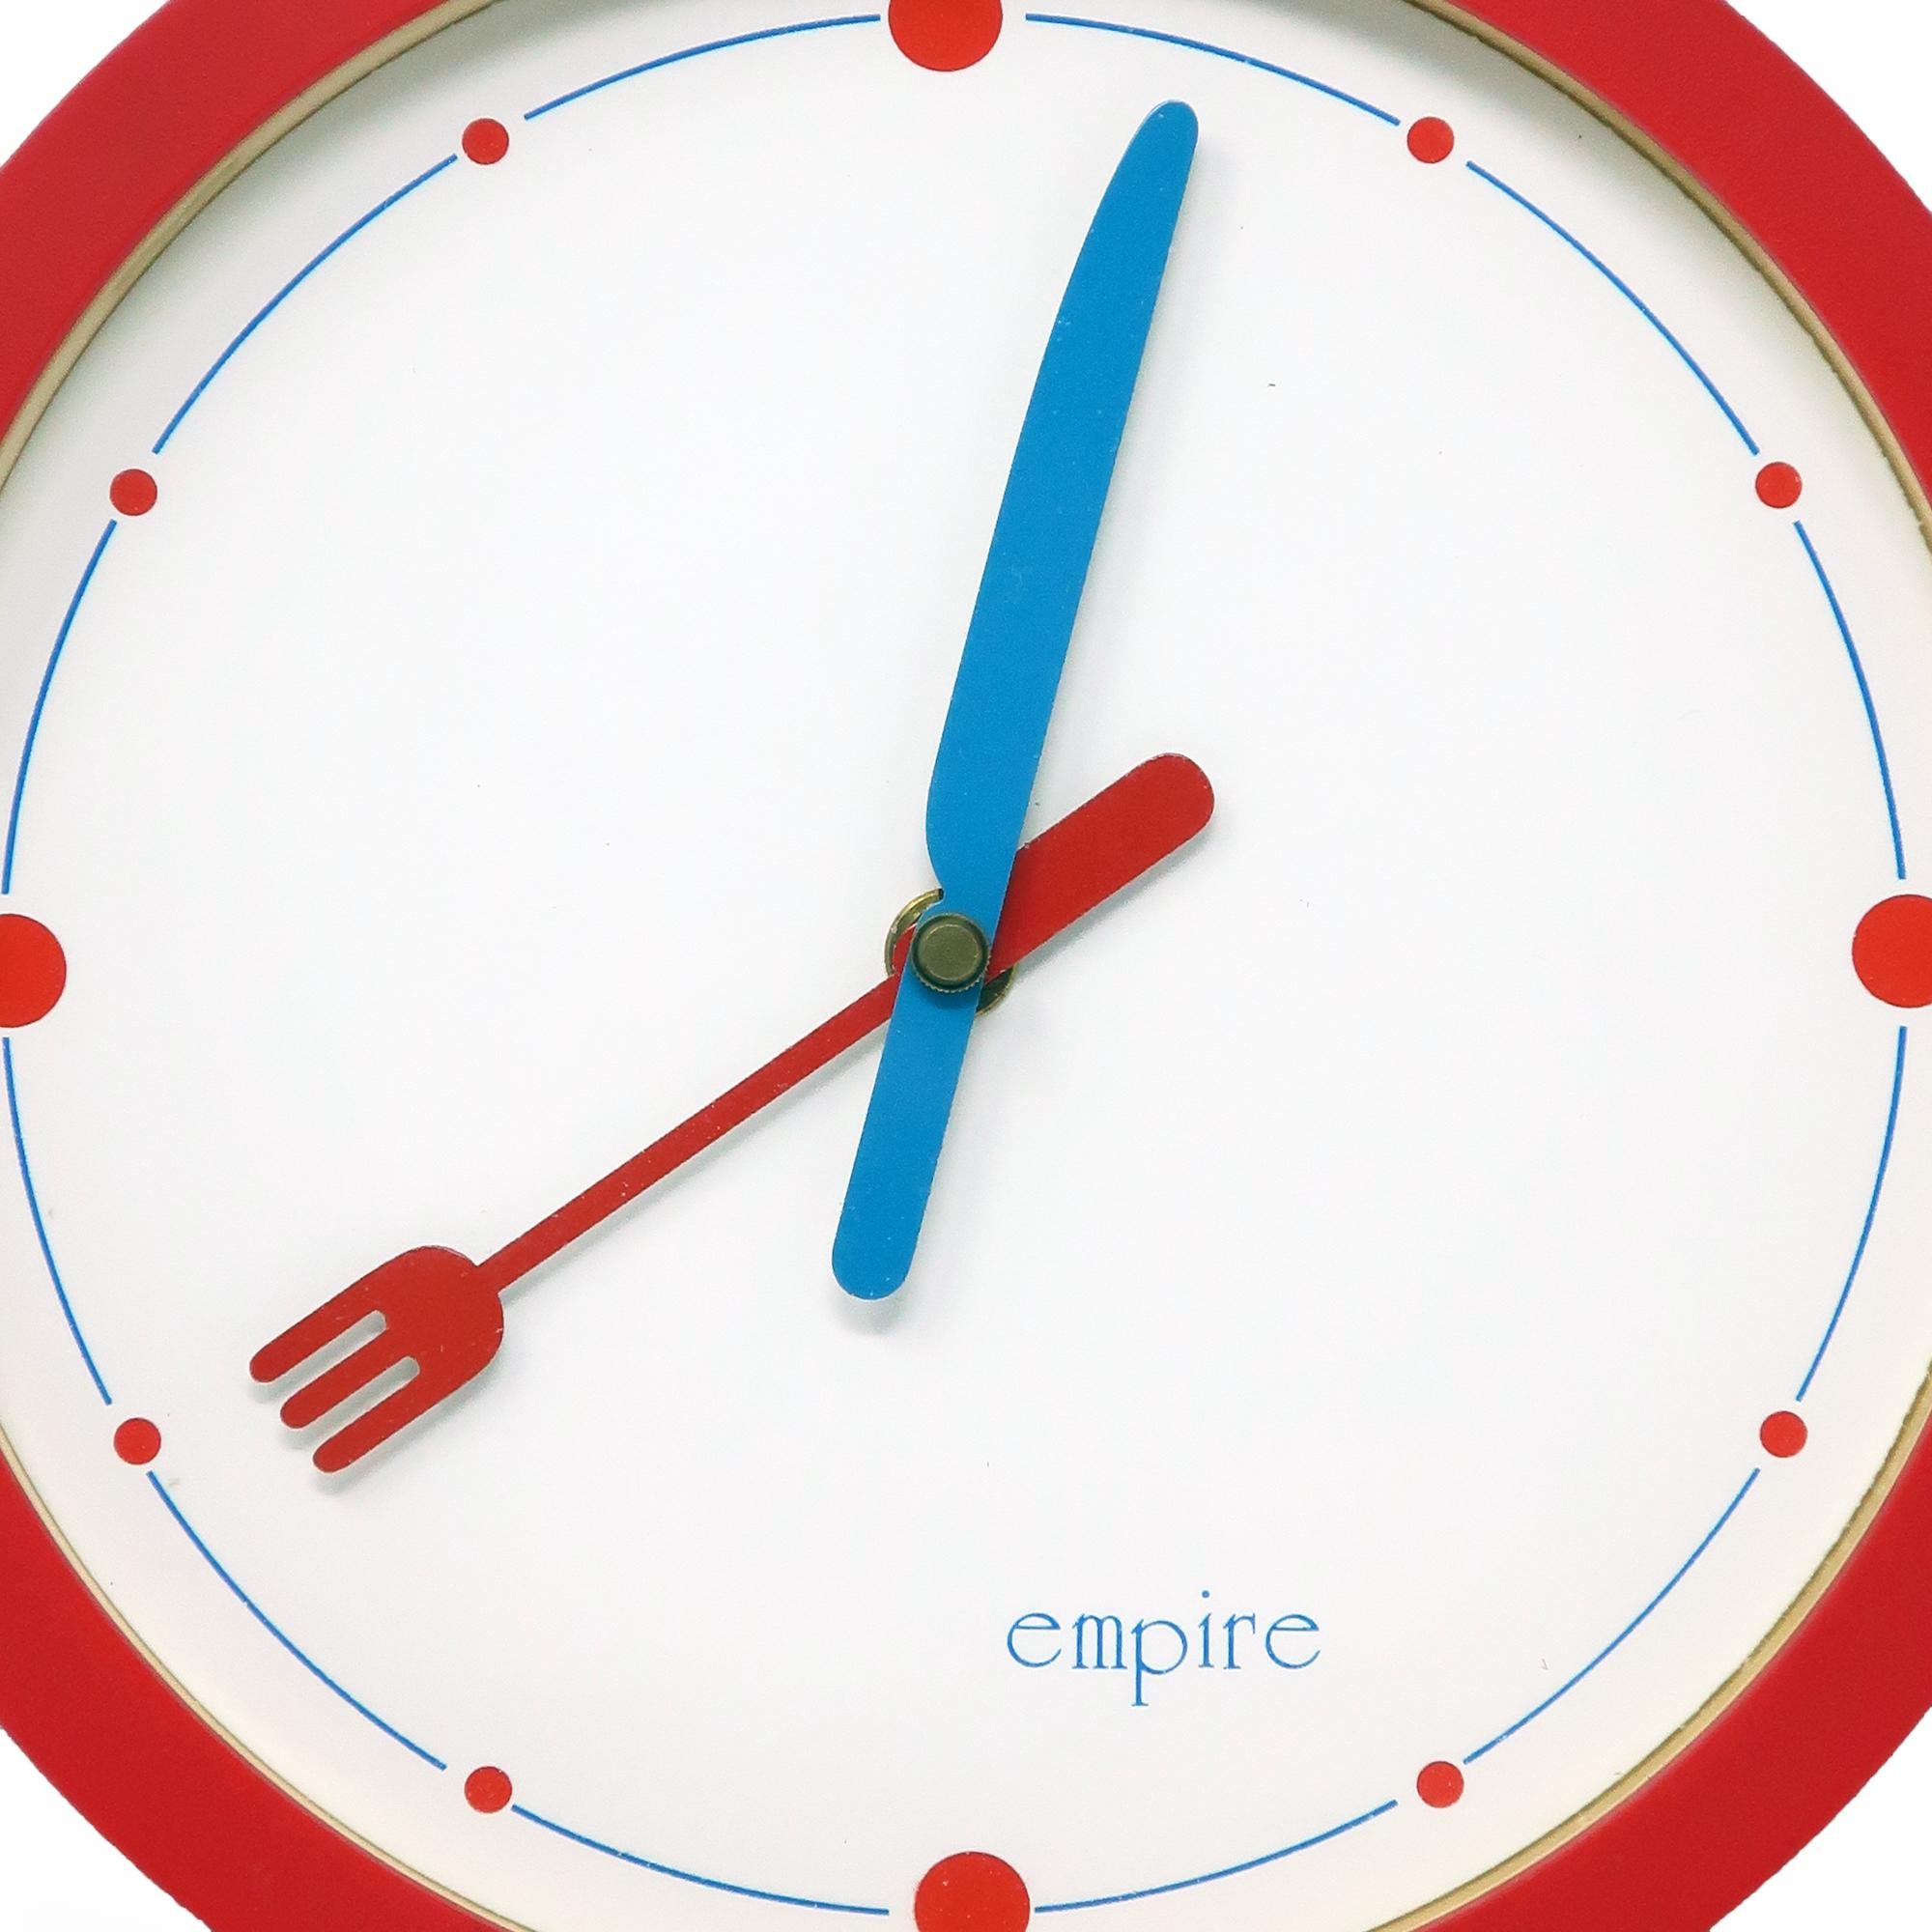 A round 1980s postmodern kitchen wall clock by Empire Arts with a red body, white face, blue and red accents, and knife and fork for minute and hour hands. A fun and whimsical wall clock that takes a single AA and works great.

In good vintage